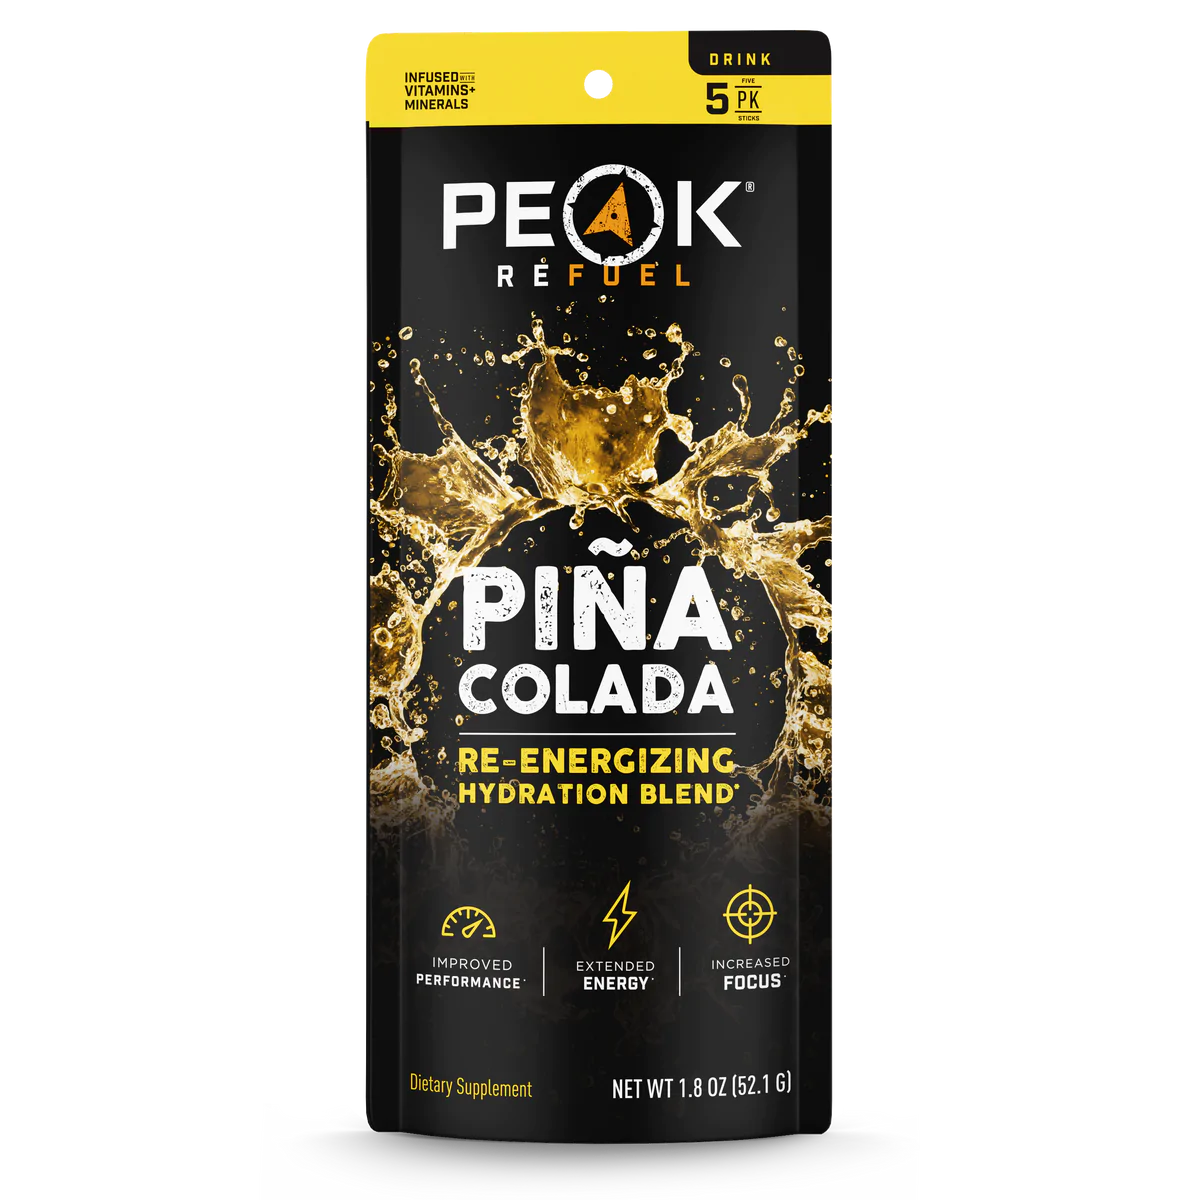 @peakrefuel pina colada energy drink mix for sale near houston texas at hawkes outdoors 2102512882